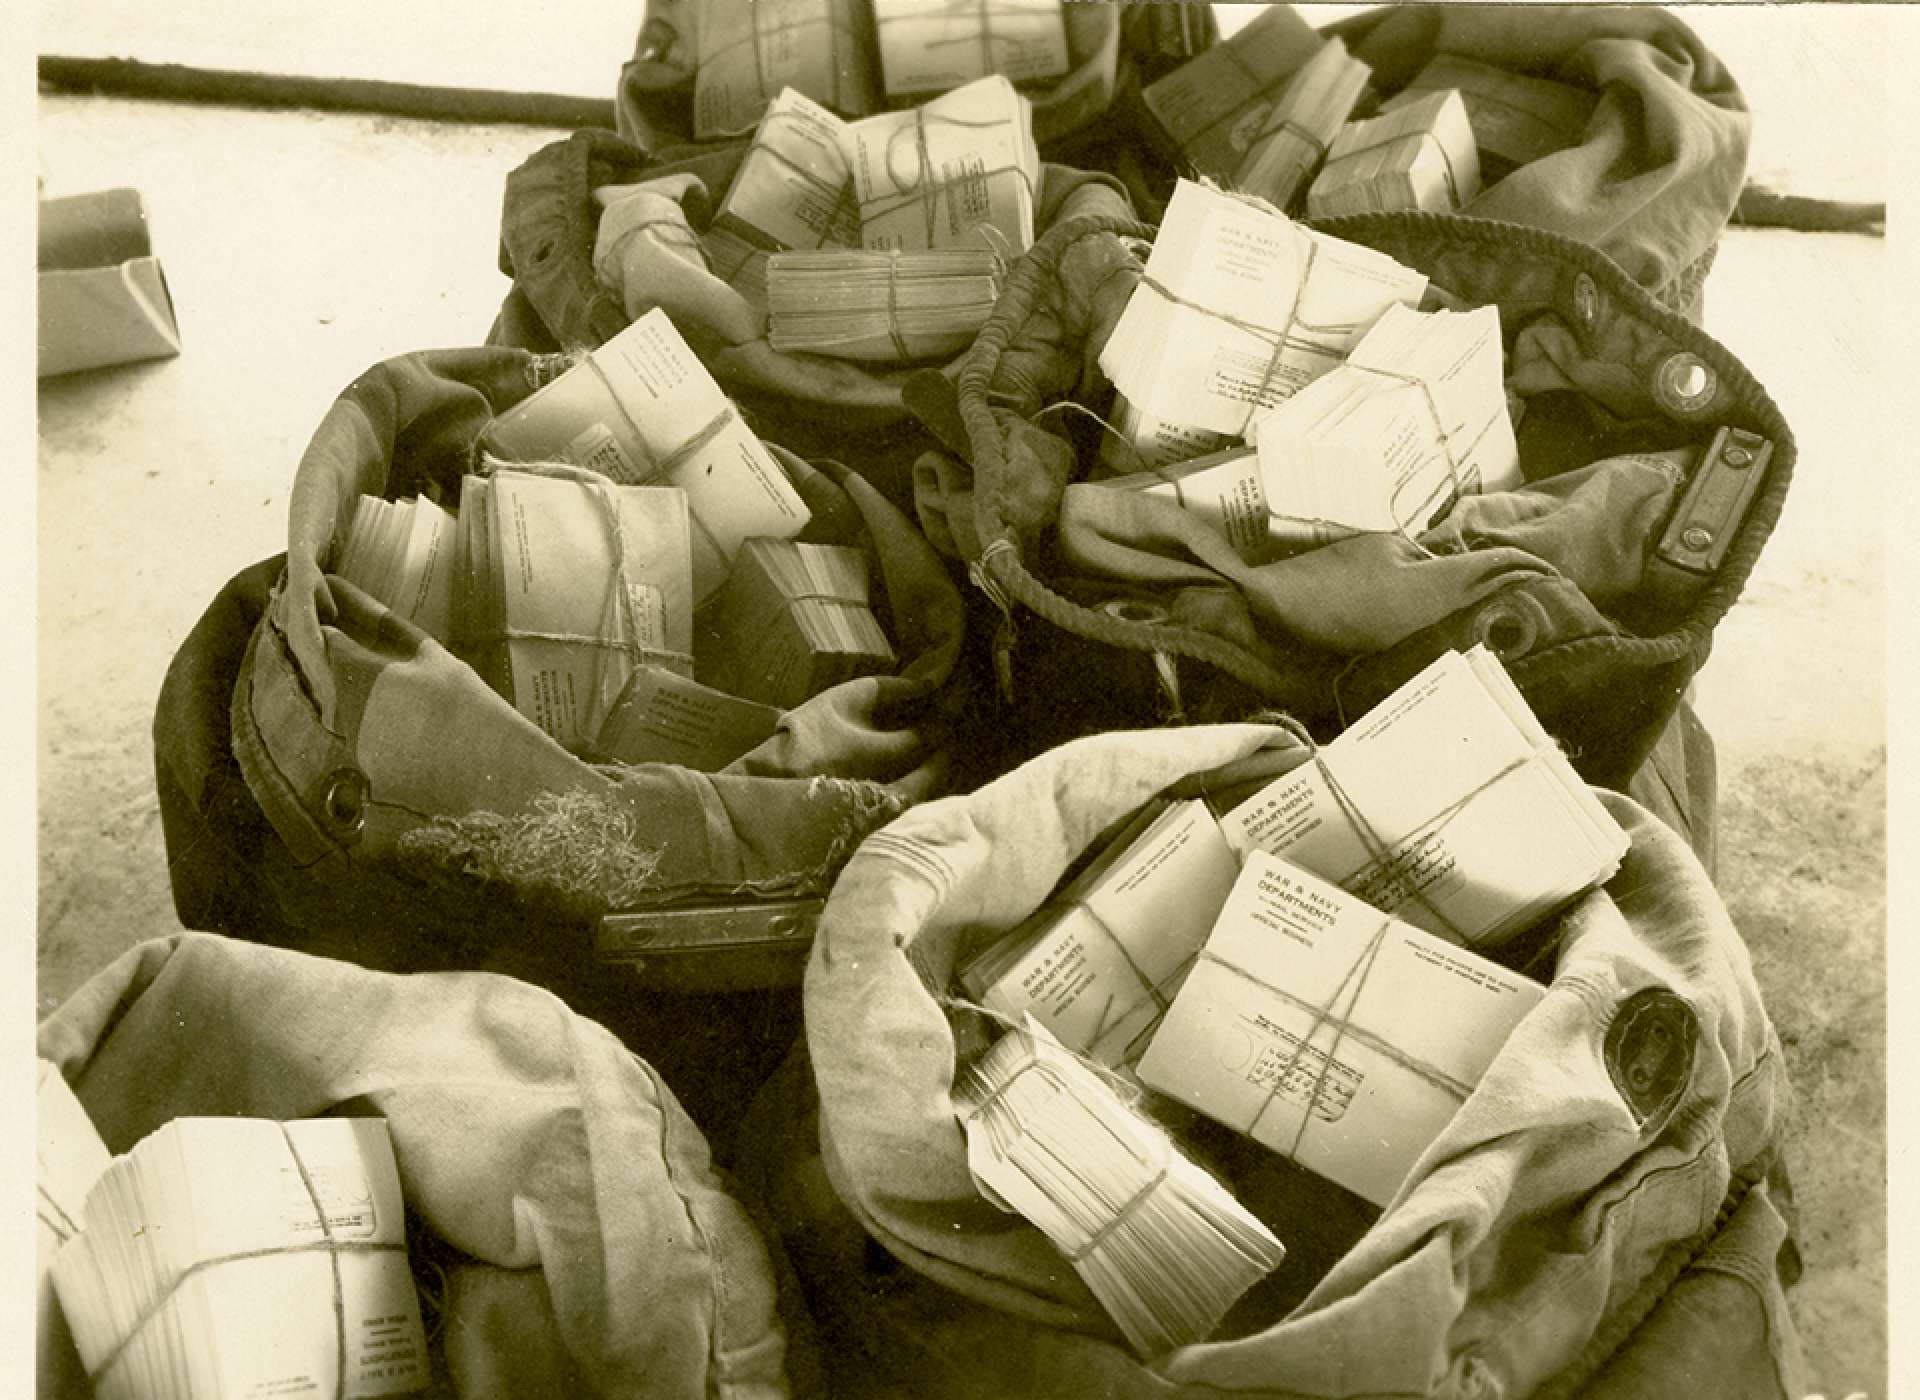 V-mail operation in the field at APO 929.”Finished V-Mail bundled, bagged and ready for dispatch through the APO to the troops.” Port Moresby, Papua New Guinea. 1944